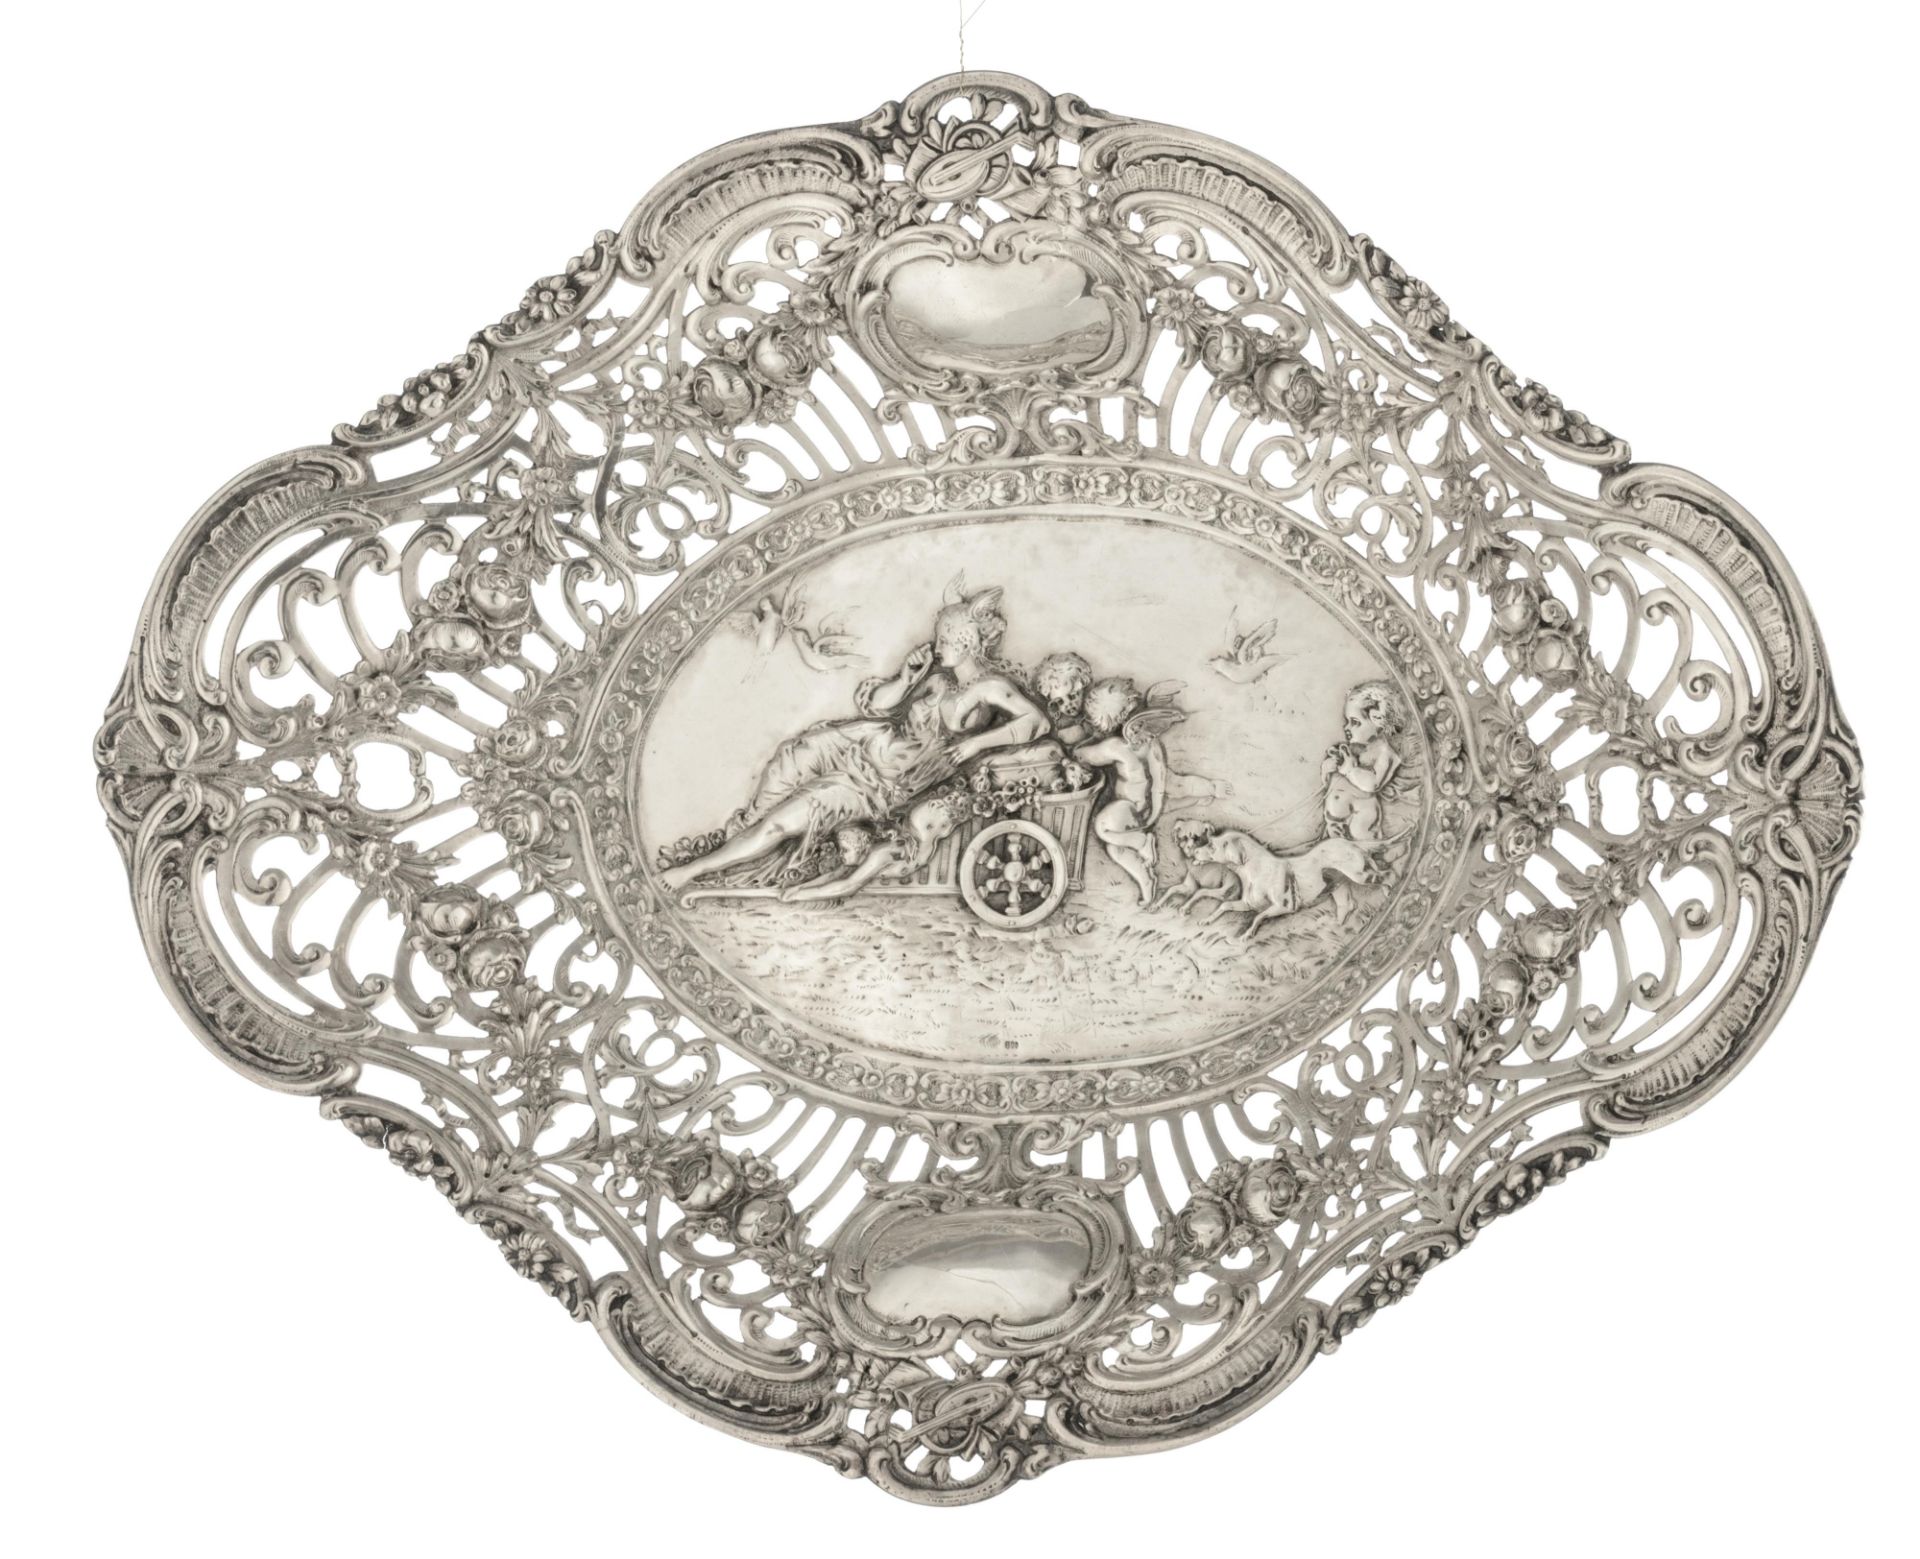 A collection of three silver chargers with ornate repousse pierced work, the well depicting playing - Bild 6 aus 12